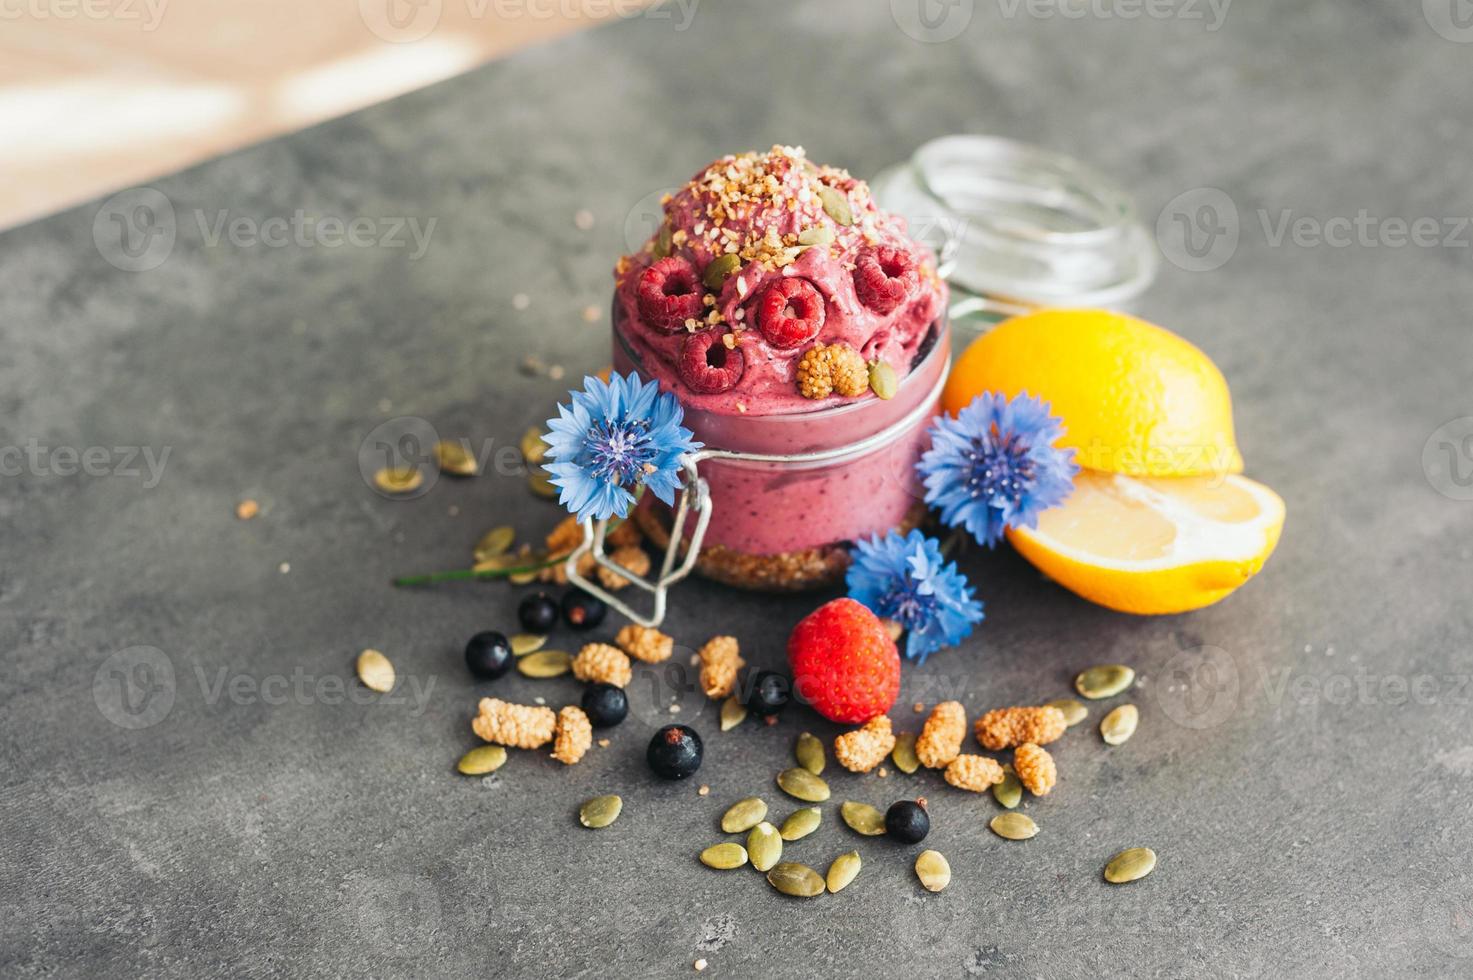 Delicious raspberry ice cream with pumpkin seeds and hempseed, decorated with blue cornflowers, black currant, sliced lemon on grey surface. Tasty dessert photo